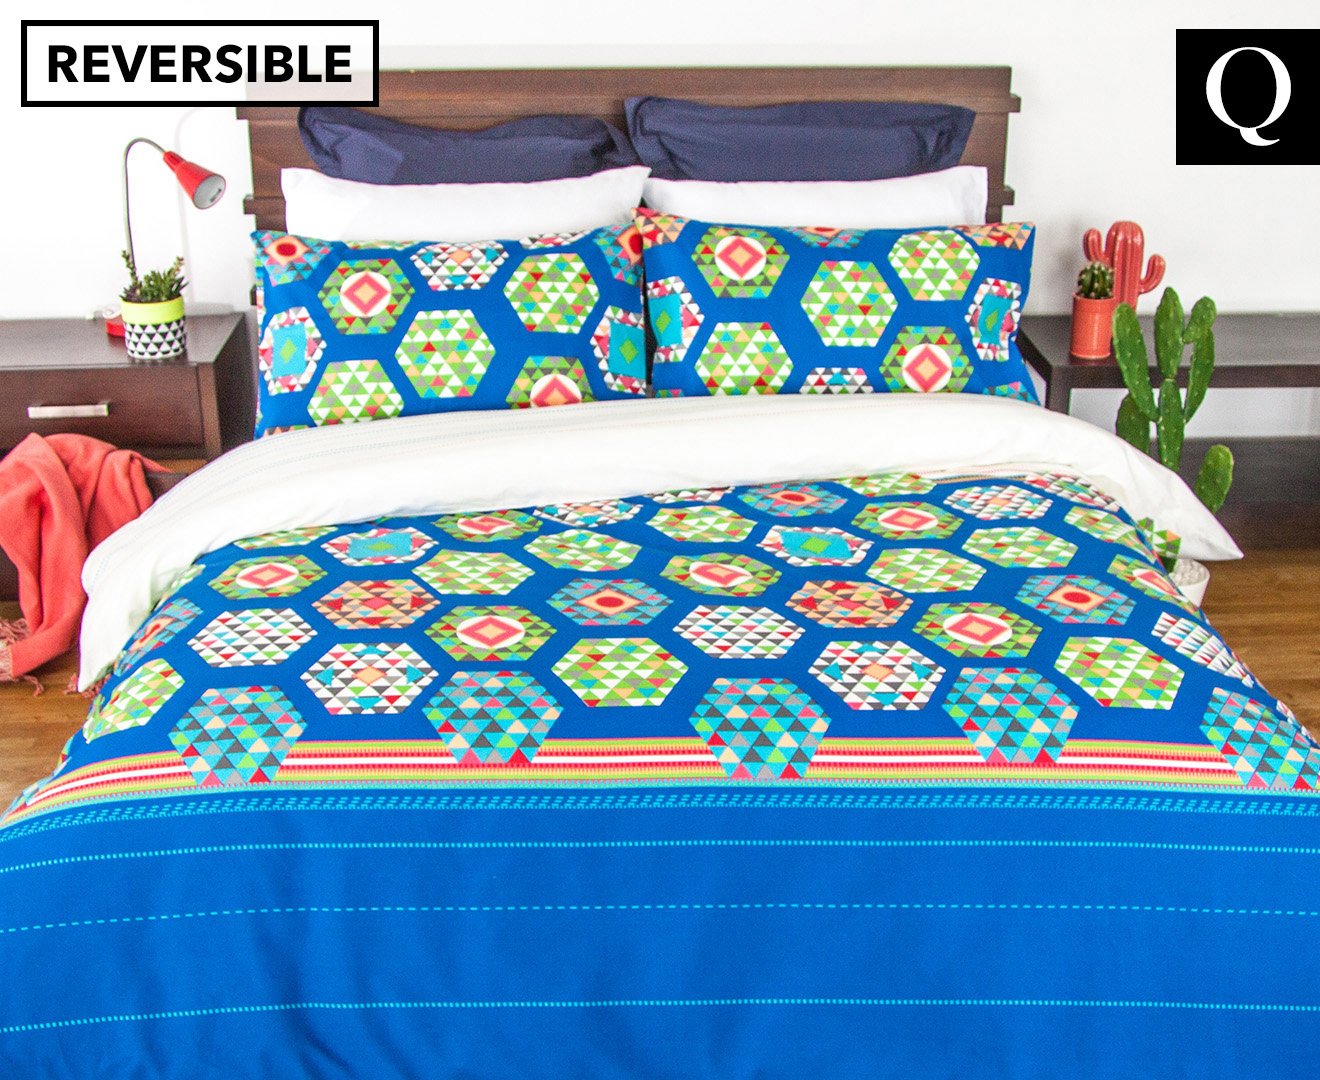 Apartmento Soda Reversible Queen Bed Quilt Cover Set - Blue